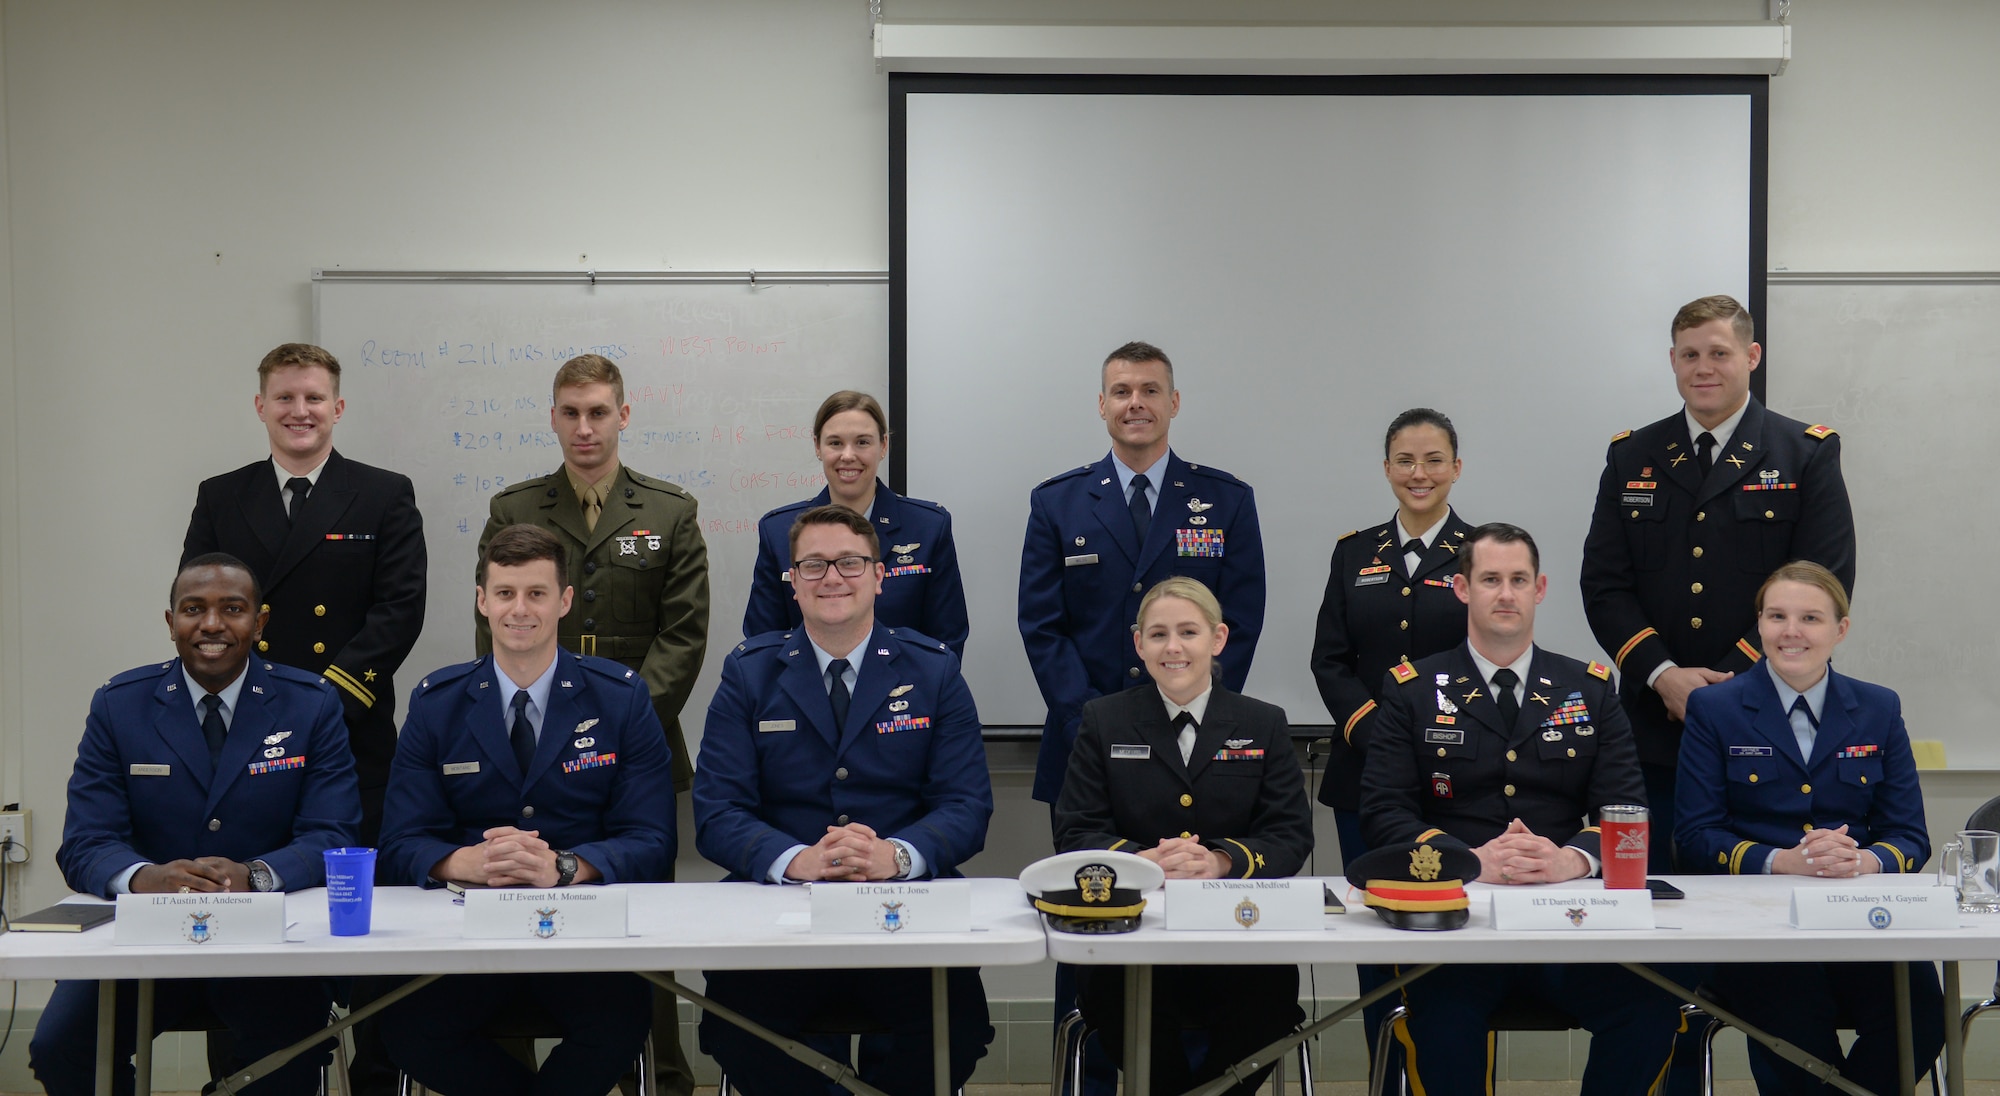 Air Force, Army, Coast Guard, Marine and Navy officers were part of a panel Feb. 10, 2020, at Marion Military Institute in Marion, Ala., where they answered questions from MMI cadets. (U.S. Air Force photo by Airman Davis Donaldson)